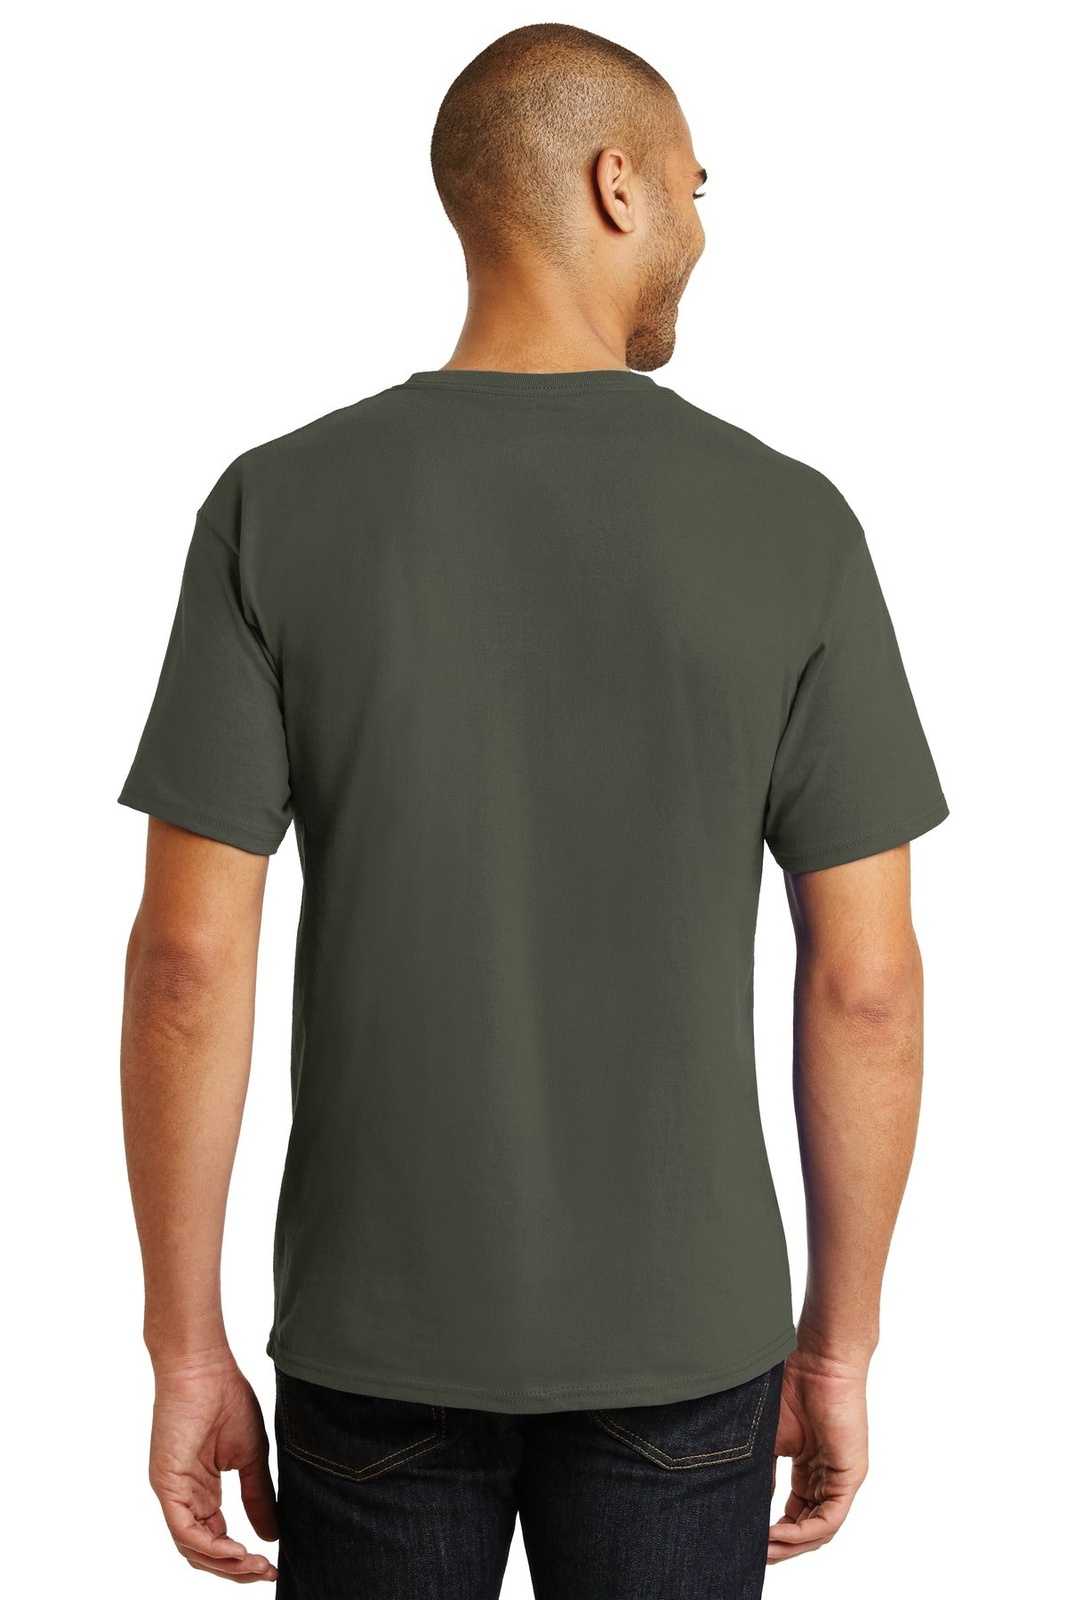 Hanes 5250 Tagless 100% Cotton T-Shirt - Fatigue Green - HIT a Double